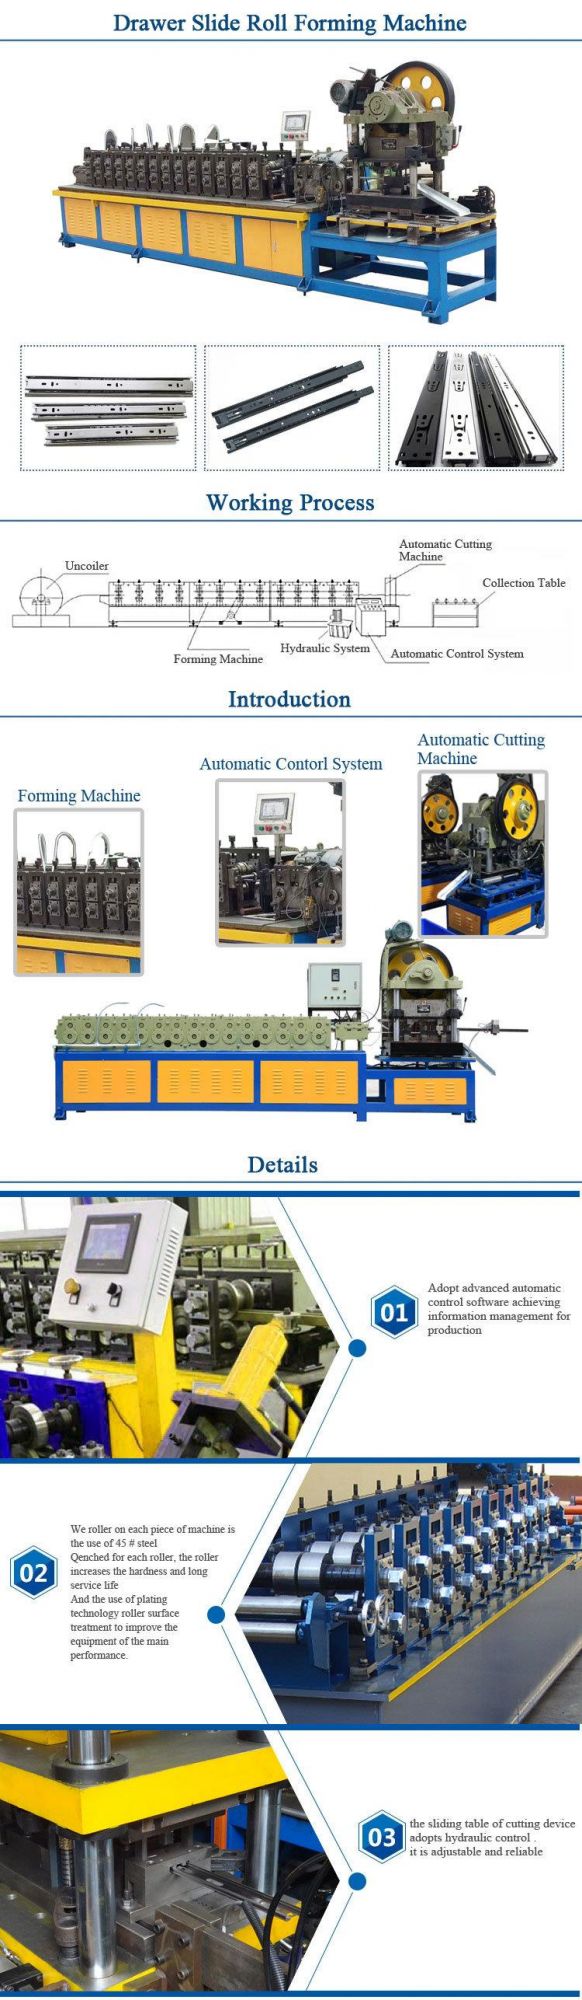 Drawer Slide Roll Forming Machine with Telescopic Channel for Sale